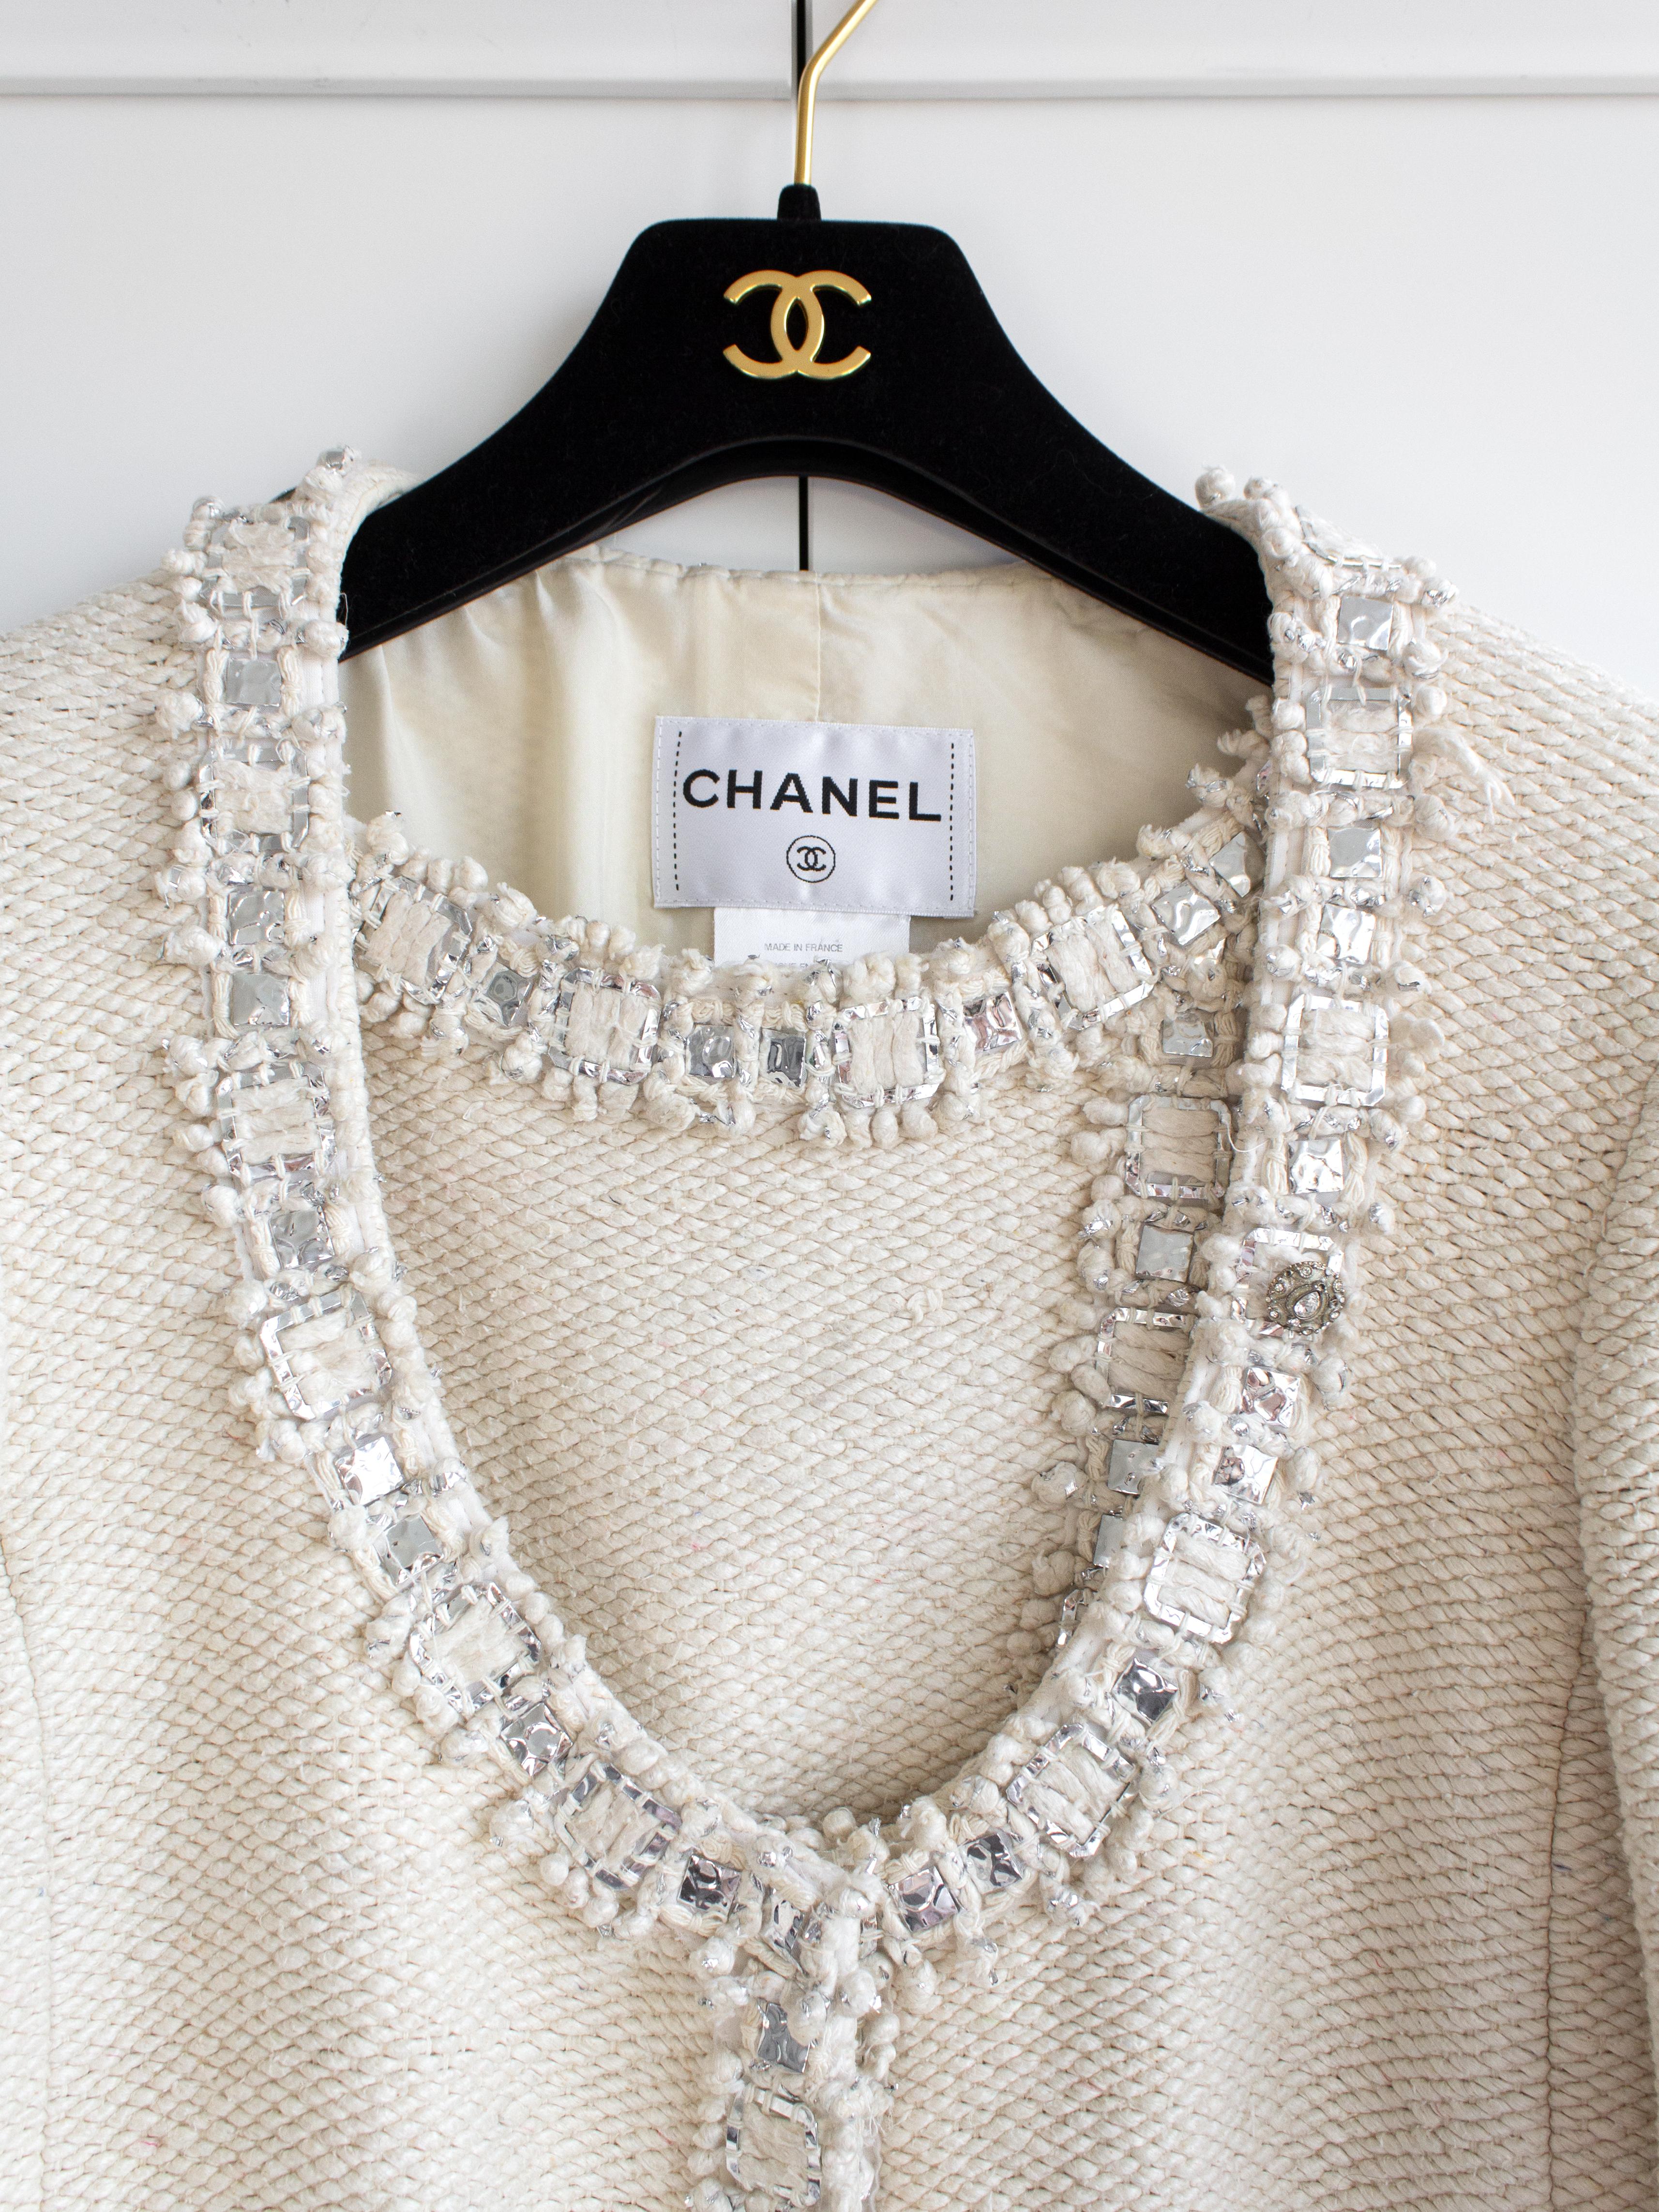 Chanel Pre-Fall 2012 Bombay Ecru Silver Embellished Tweed 12A Jacket Skirt Suit 5